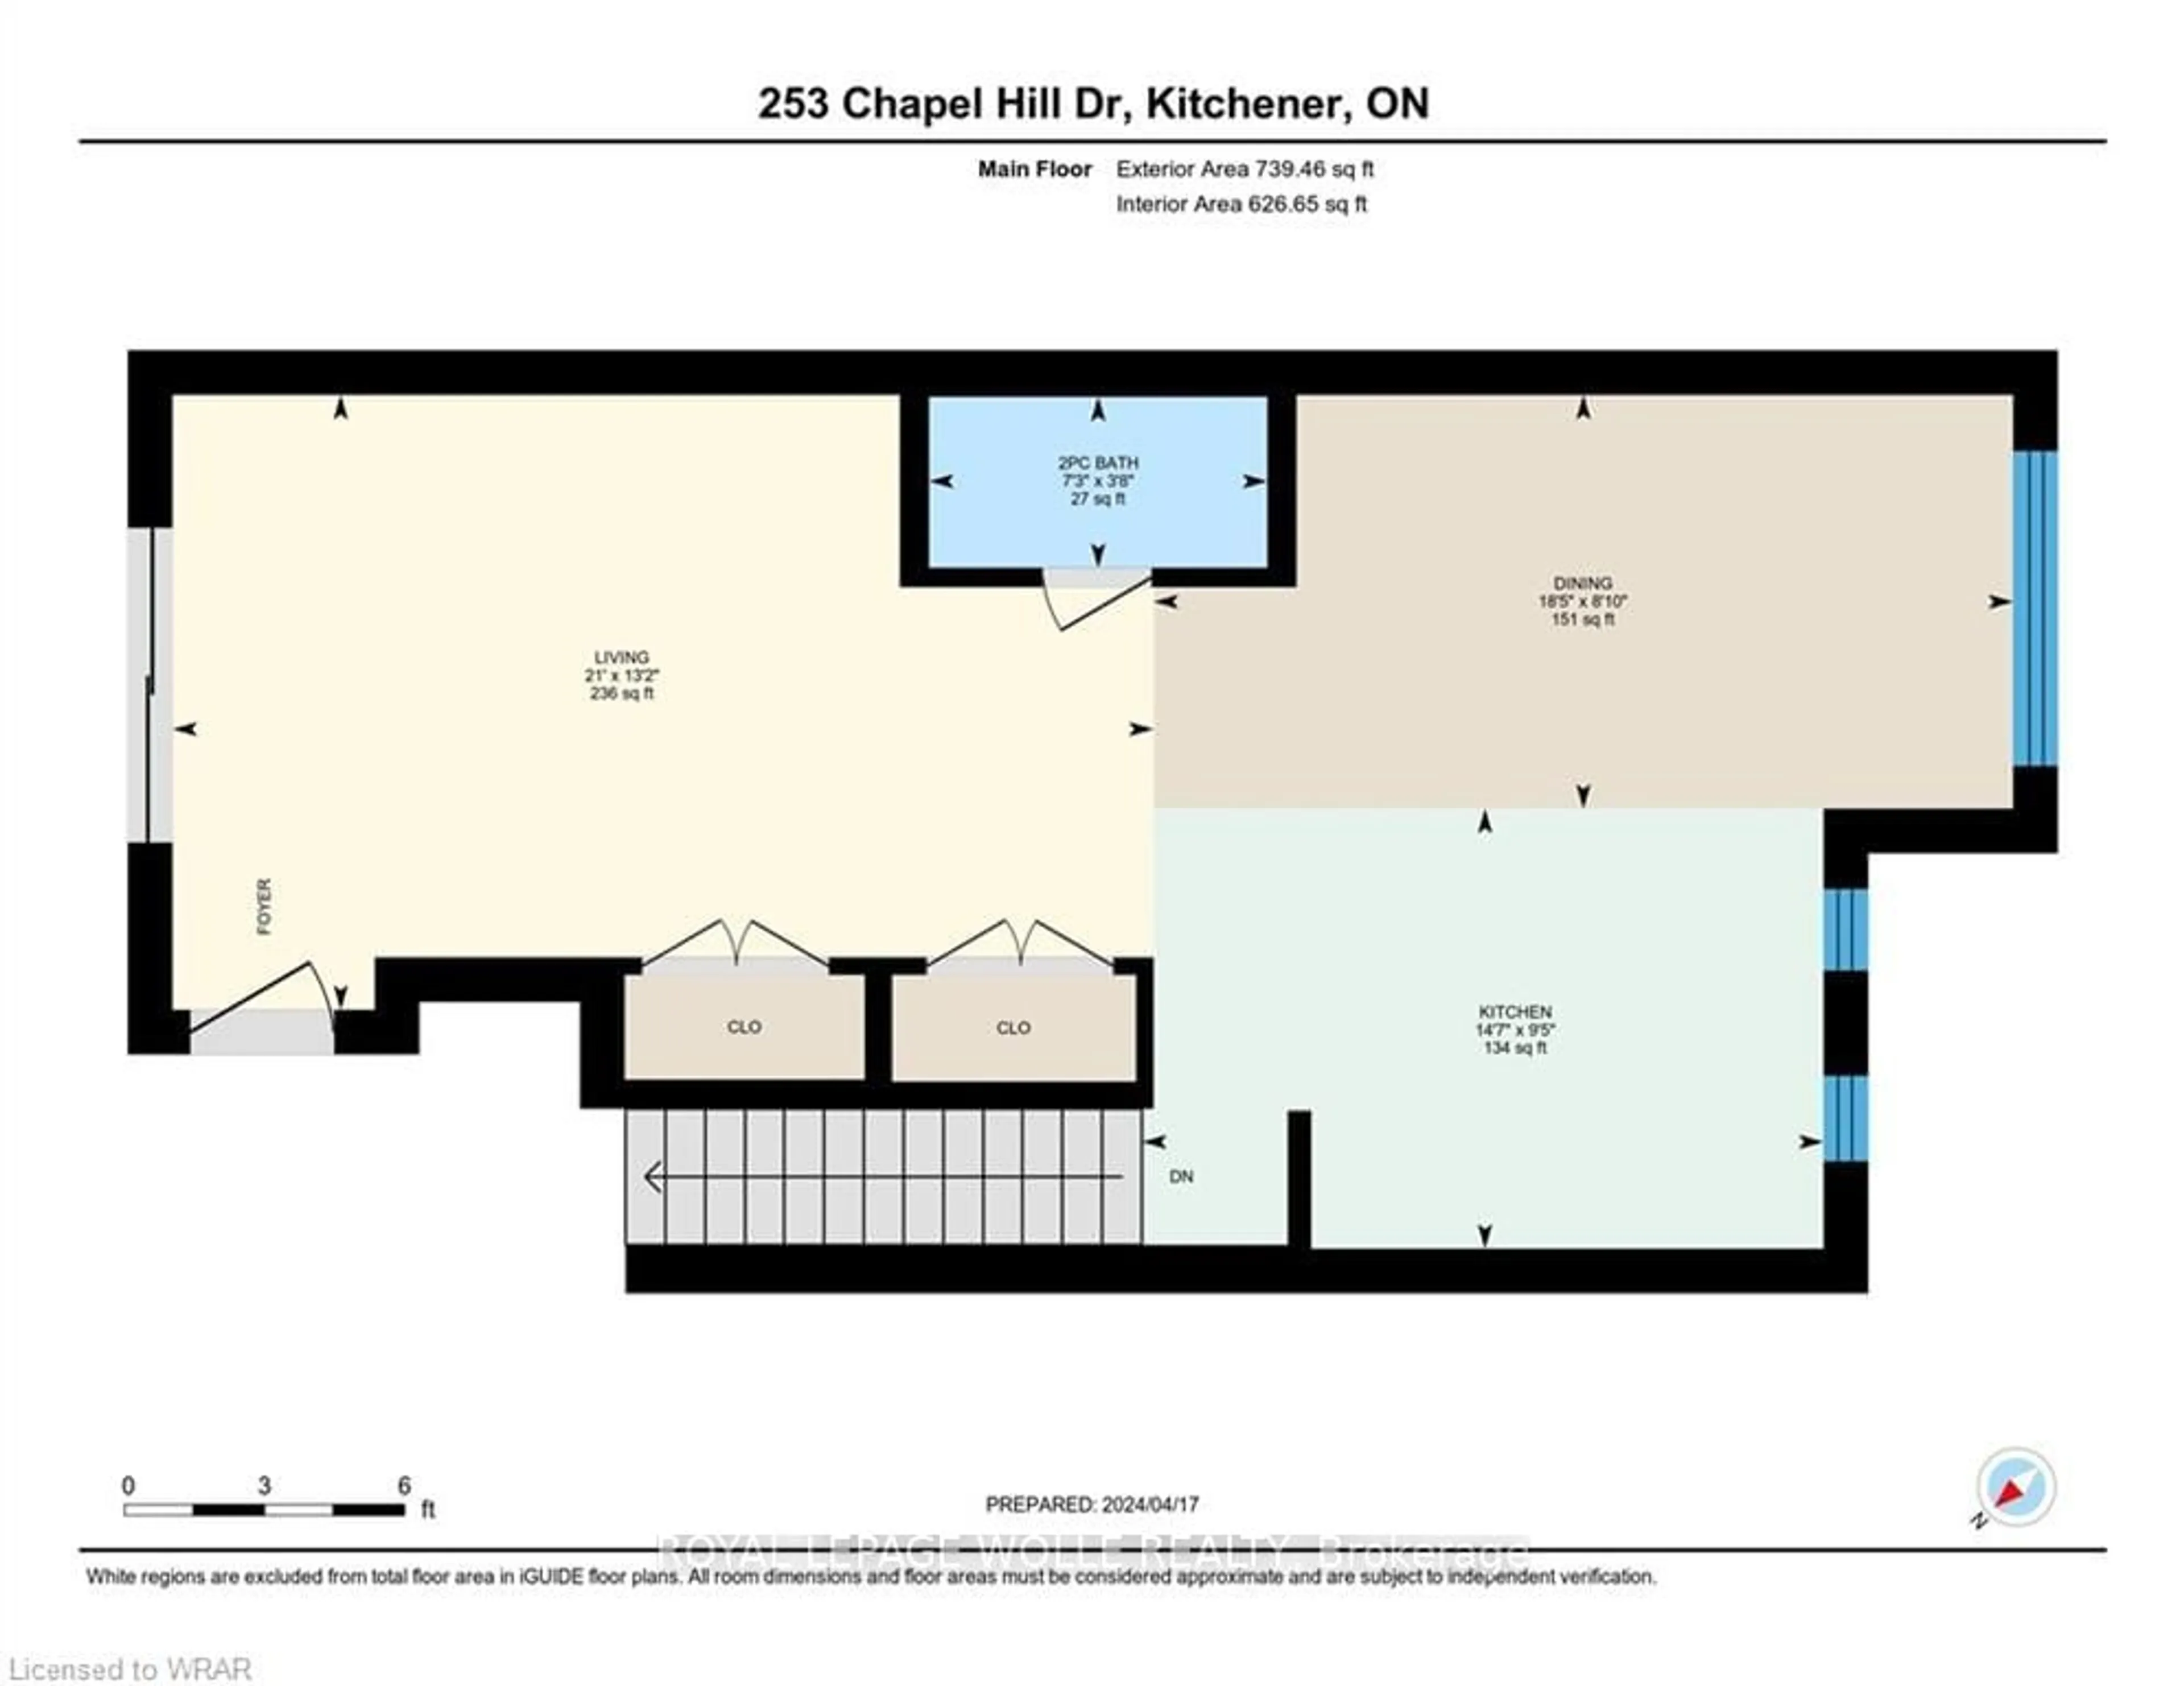 Floor plan for 253 Chapel Hill Dr #41, Kitchener Ontario N2R 0S4